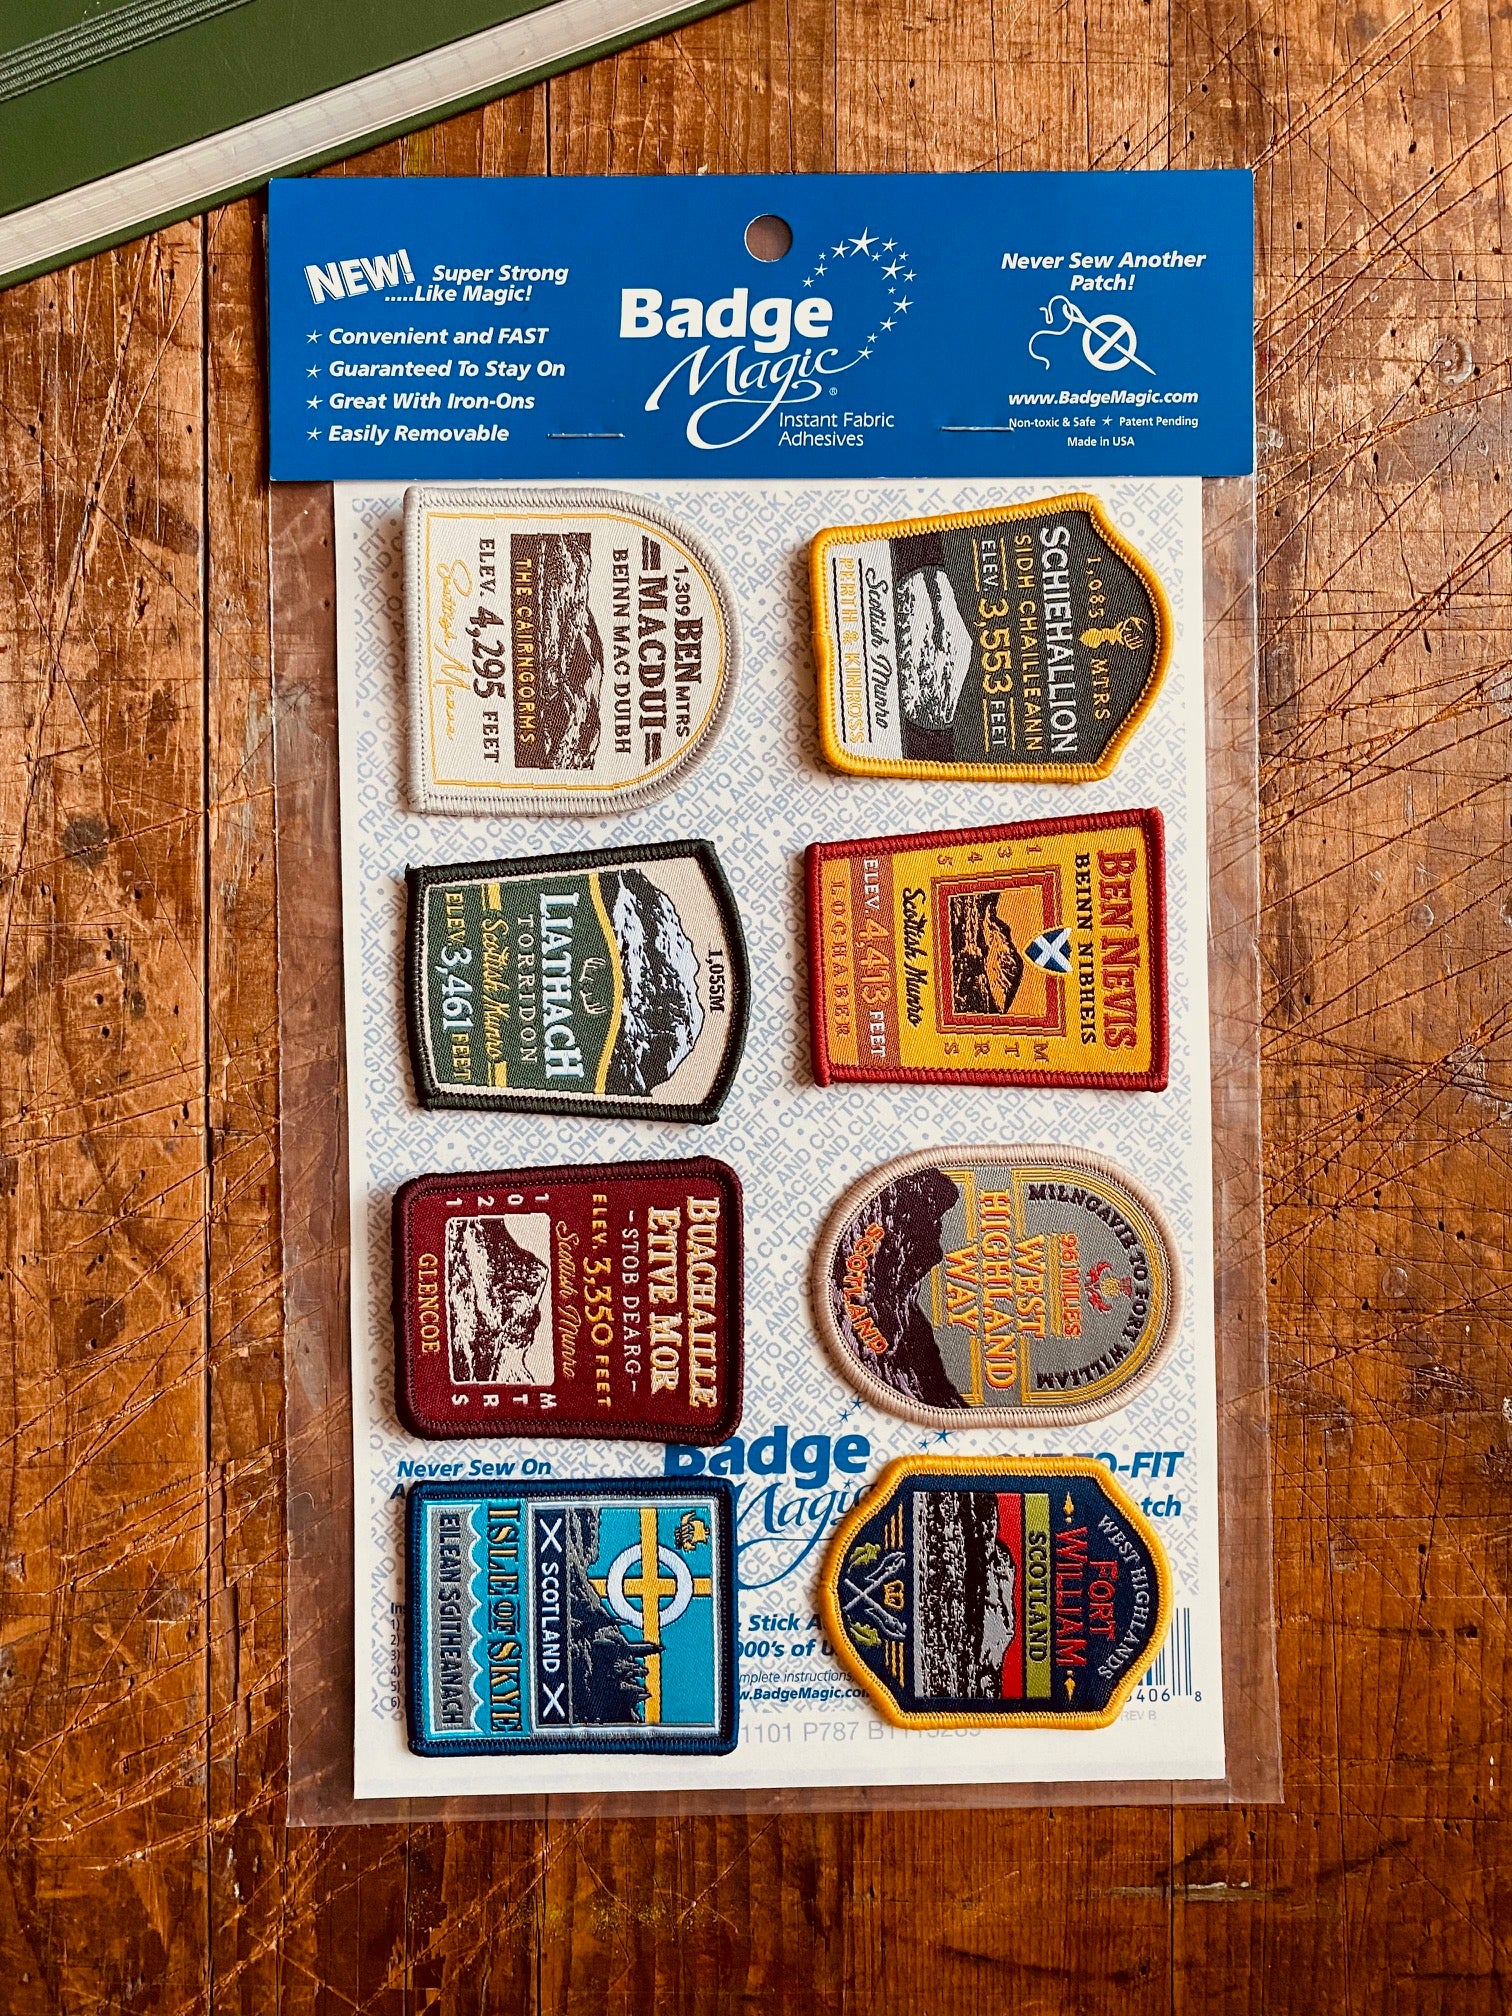 Badge Magic Cut to Fit Freestyle Patch Adhesive Kit (2-Pack)